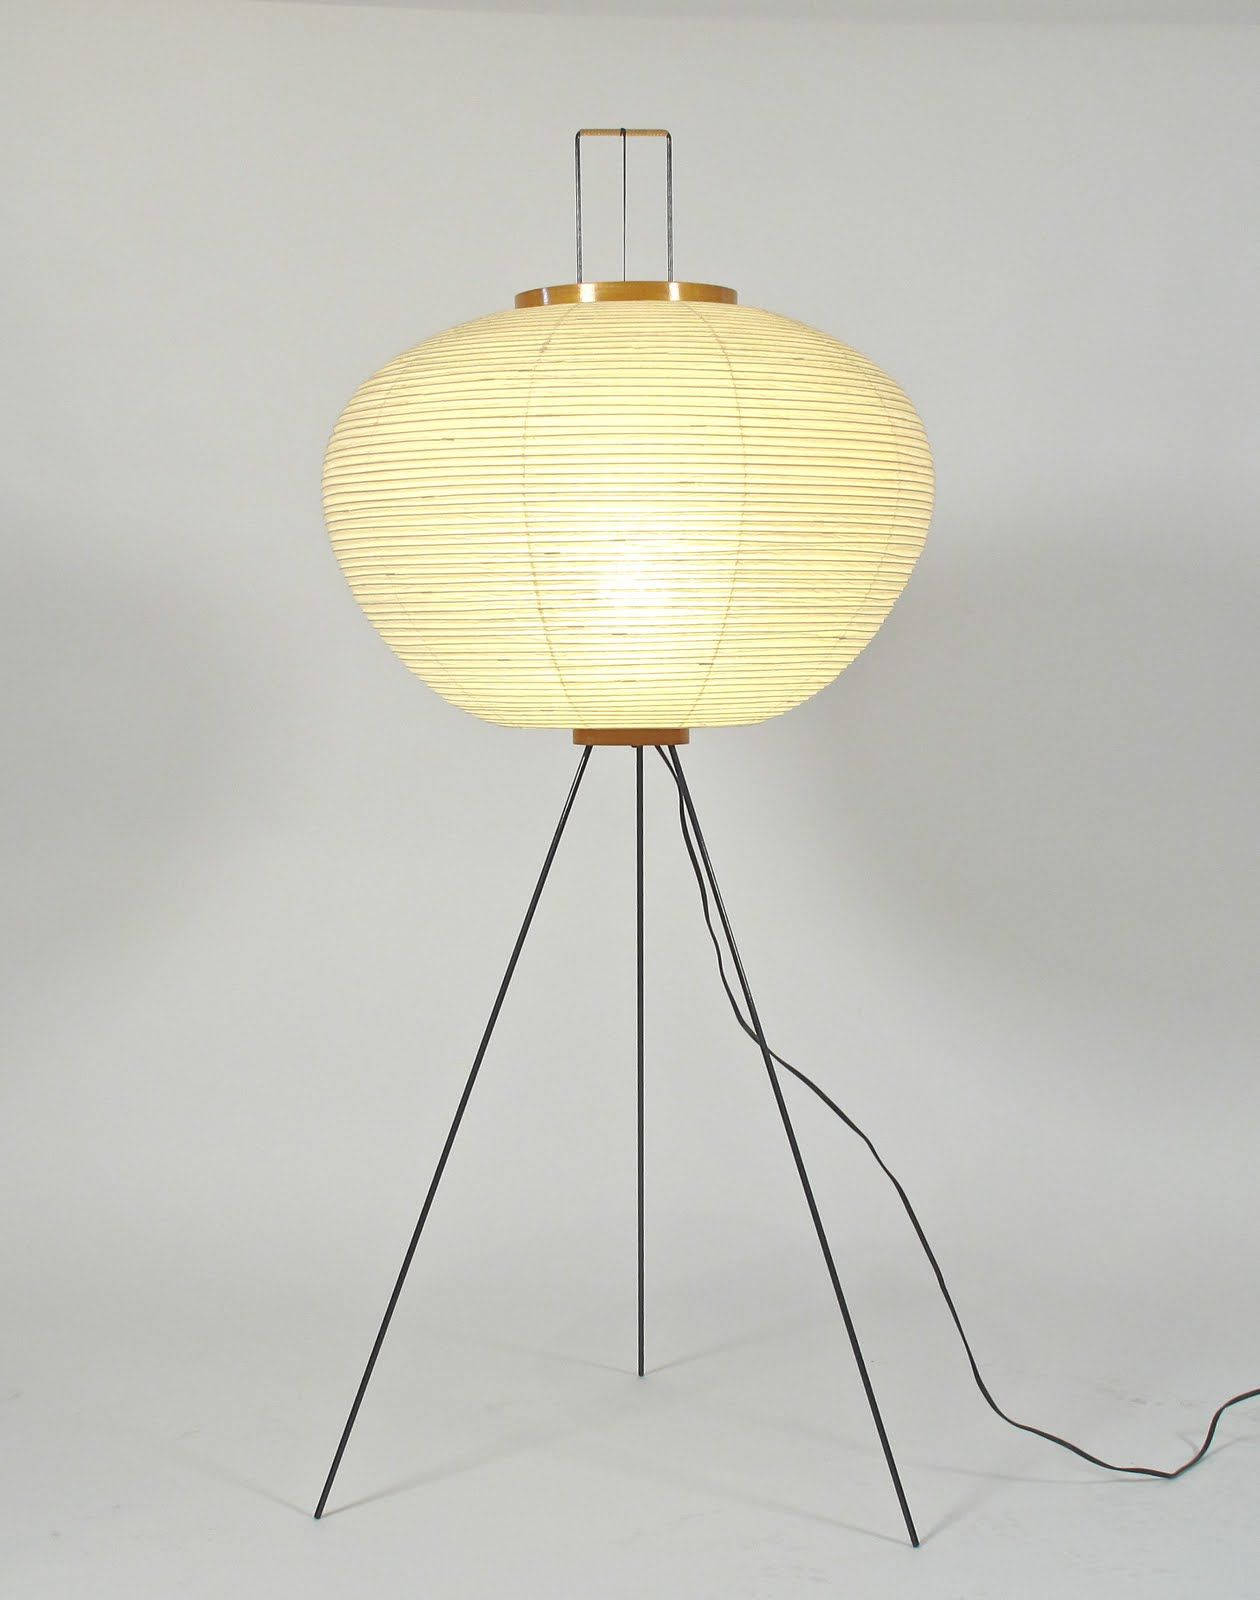 Isamu Noguchi Tripod Floor Lamp 1960s Too Big For Our throughout sizing 1260 X 1600